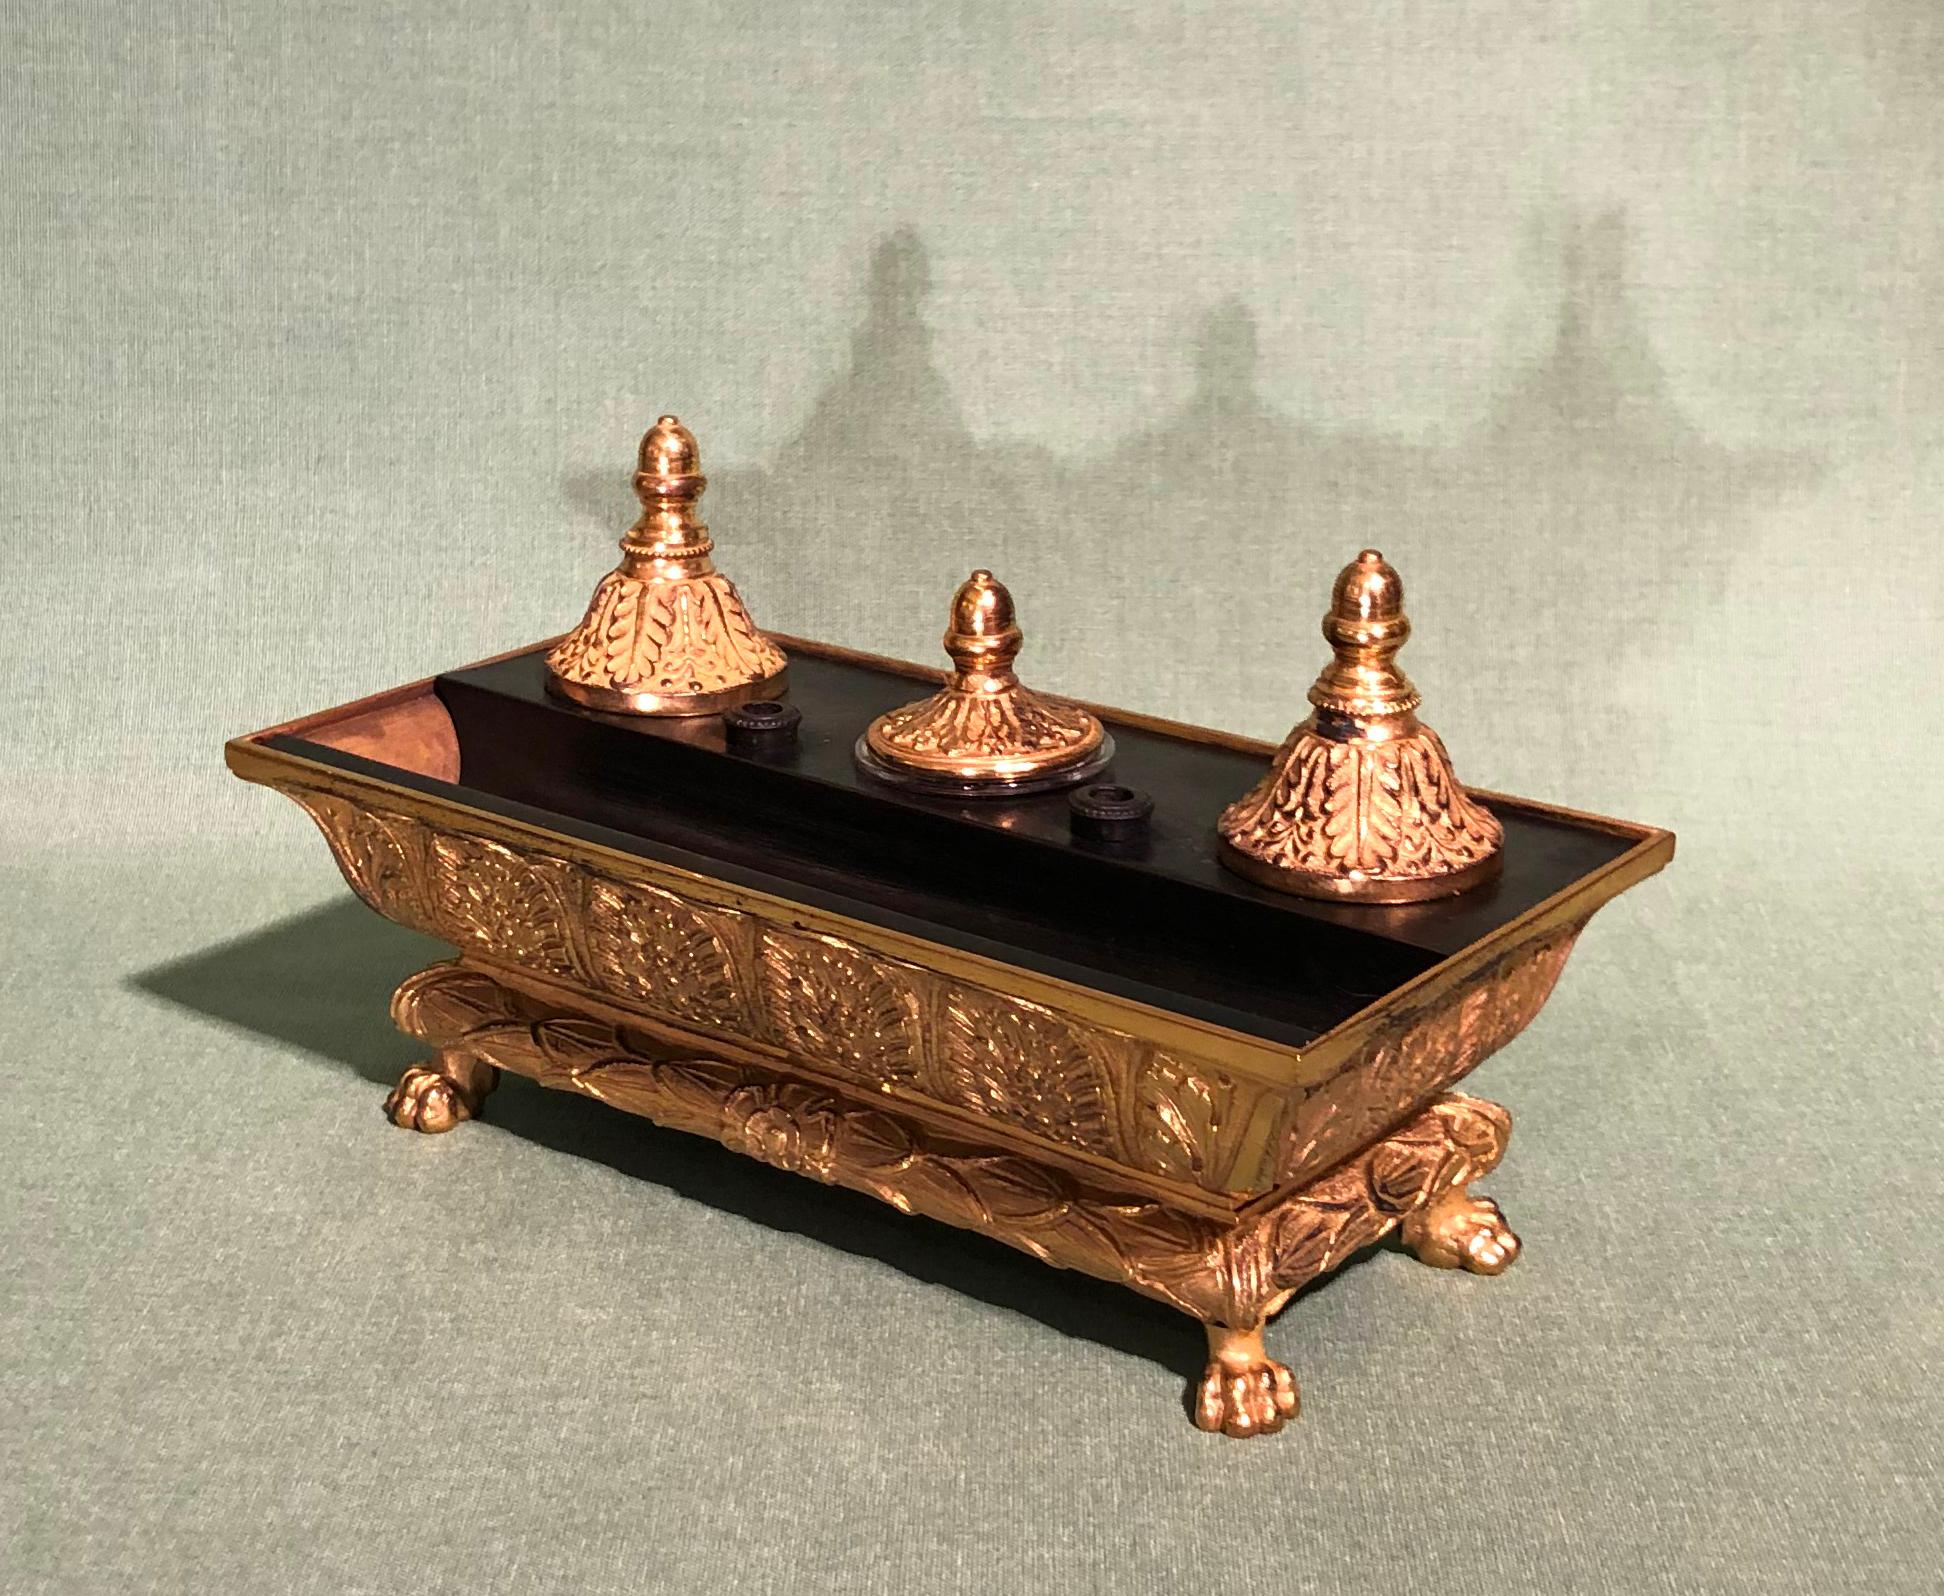 An early 19th century Regency period bronze and ormolu encrier, having penholders and triple inkwells with leaf cast lids contained in leaf decorated classical bath, supported on wreath moulded plinth ending on lion 's paw feet.